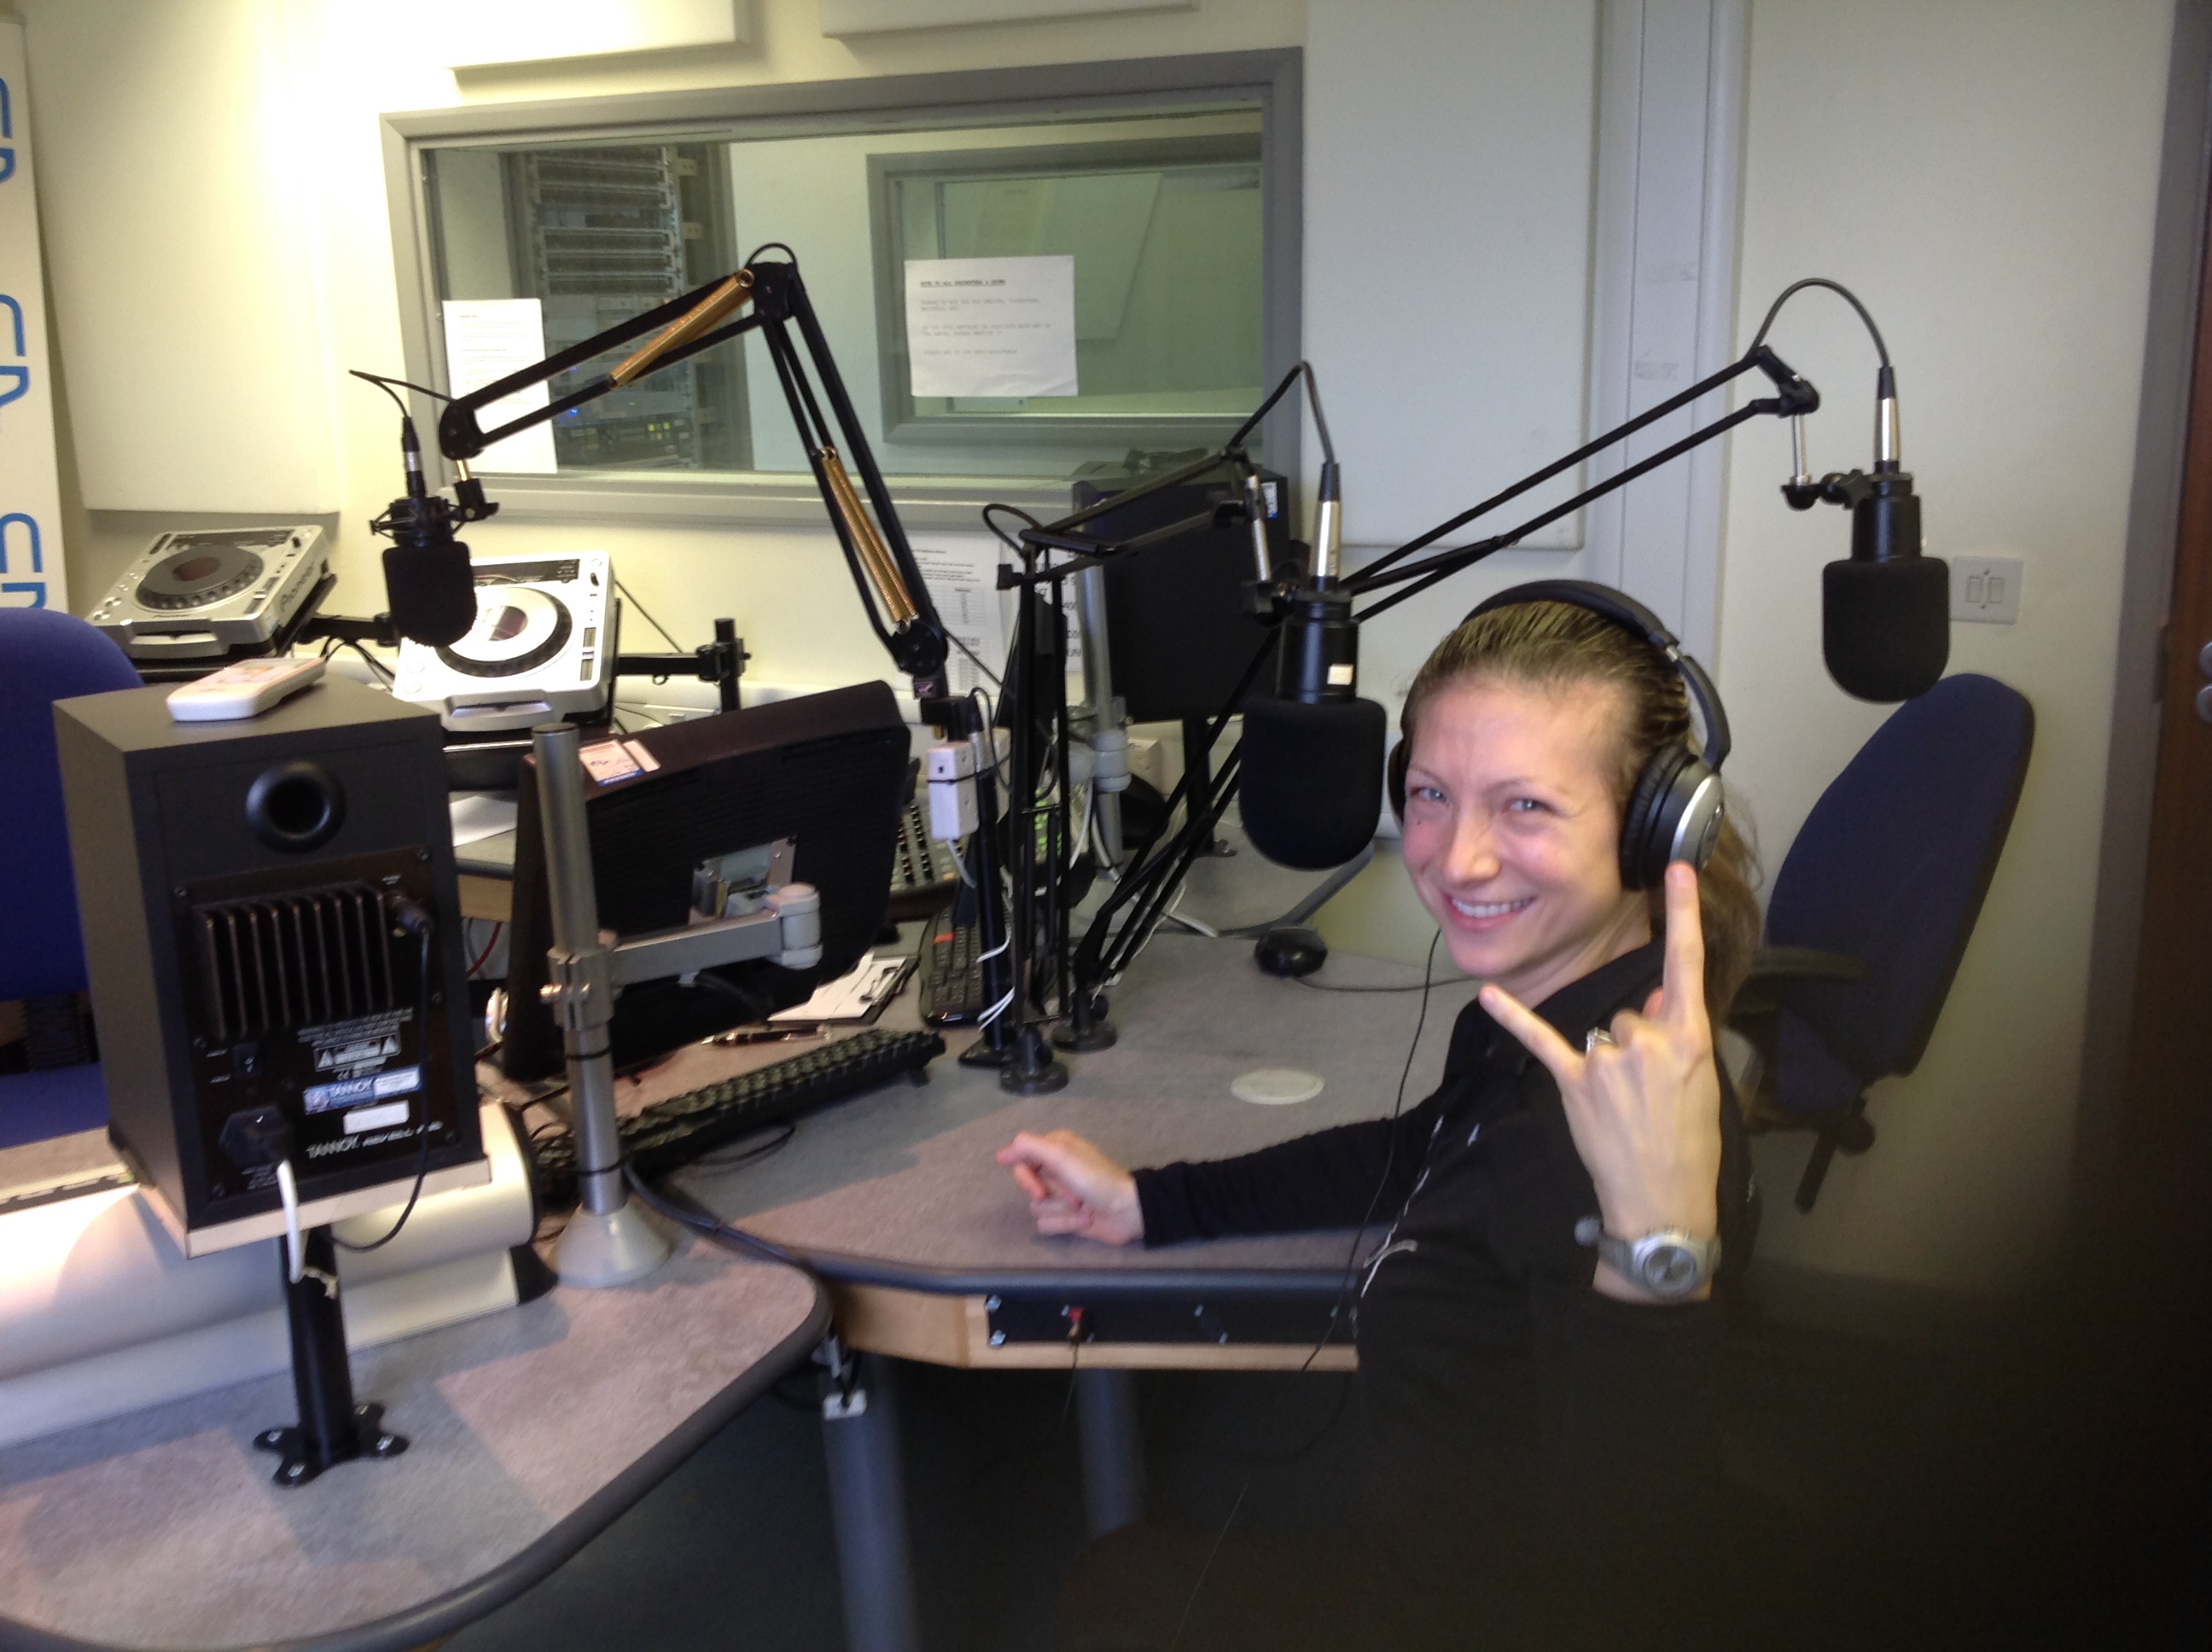 Southampton Personal Trainer Gen on 93.7 Express FM Portsmouth November 2013